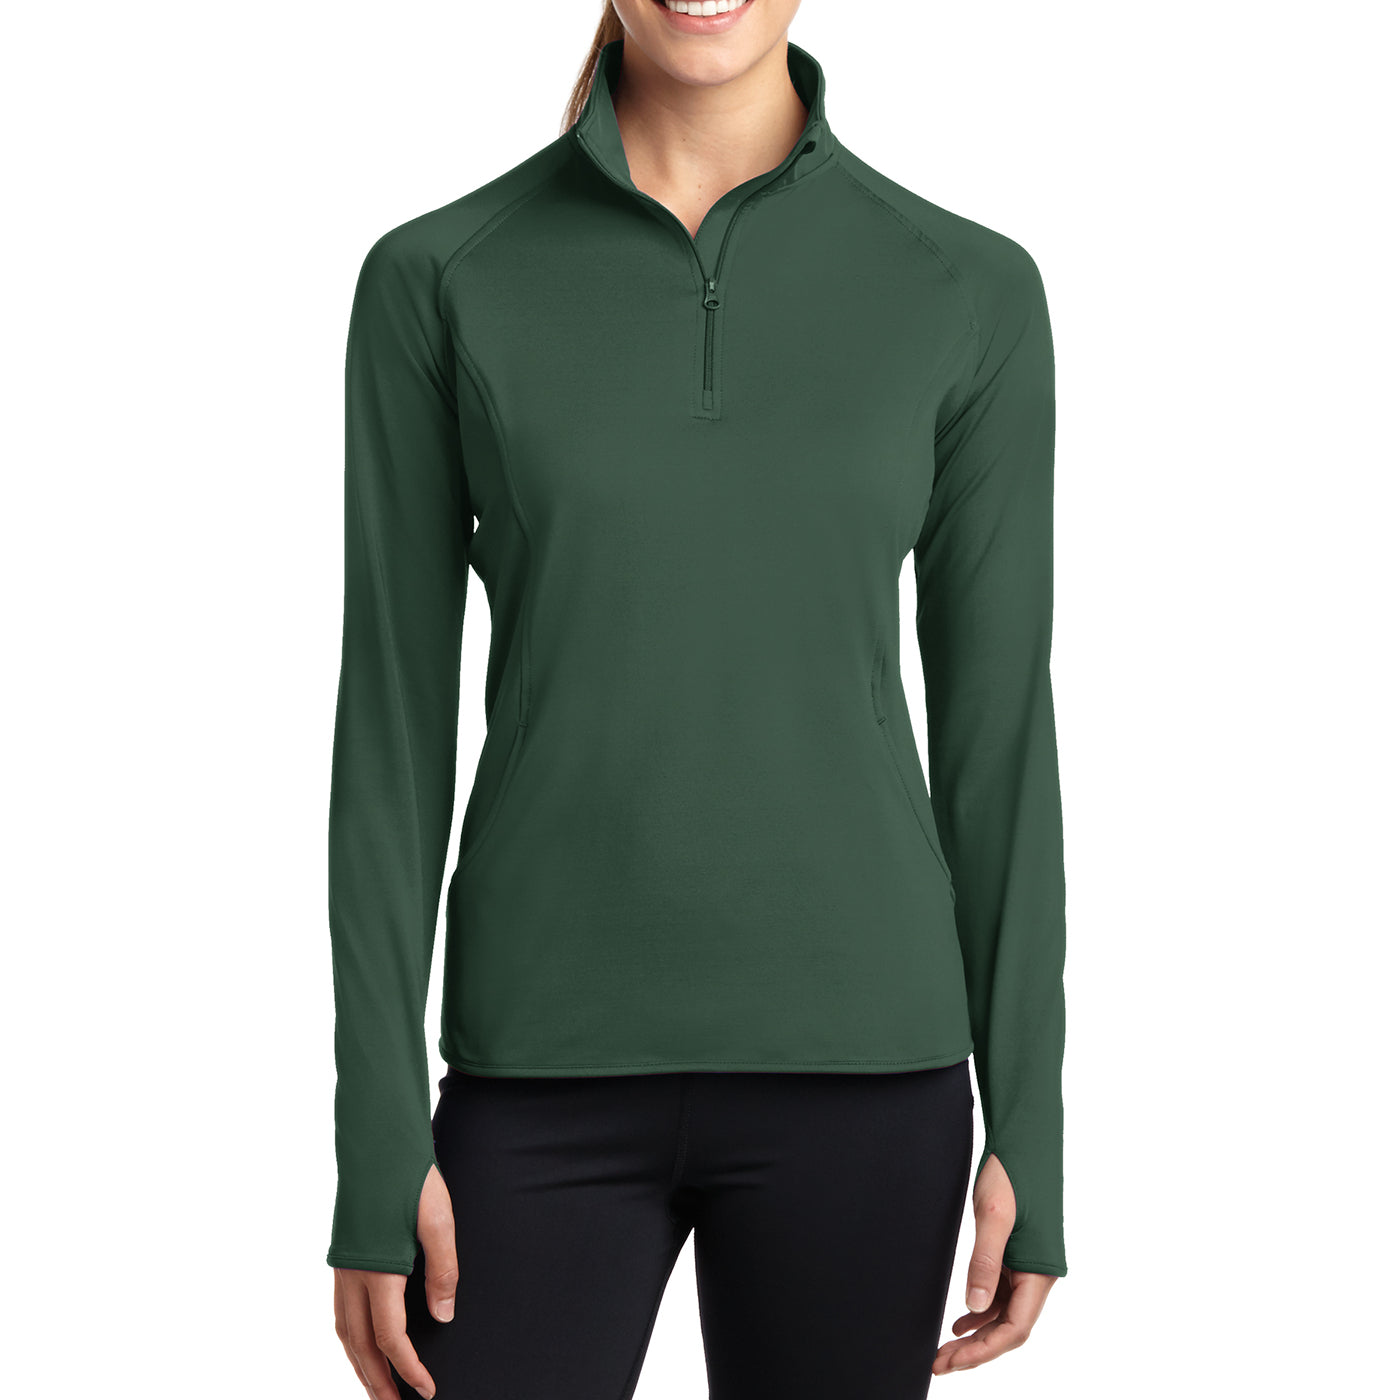 Women's Sport Wick Stretch 1/2 Zip Pullover - Forest Green - Front